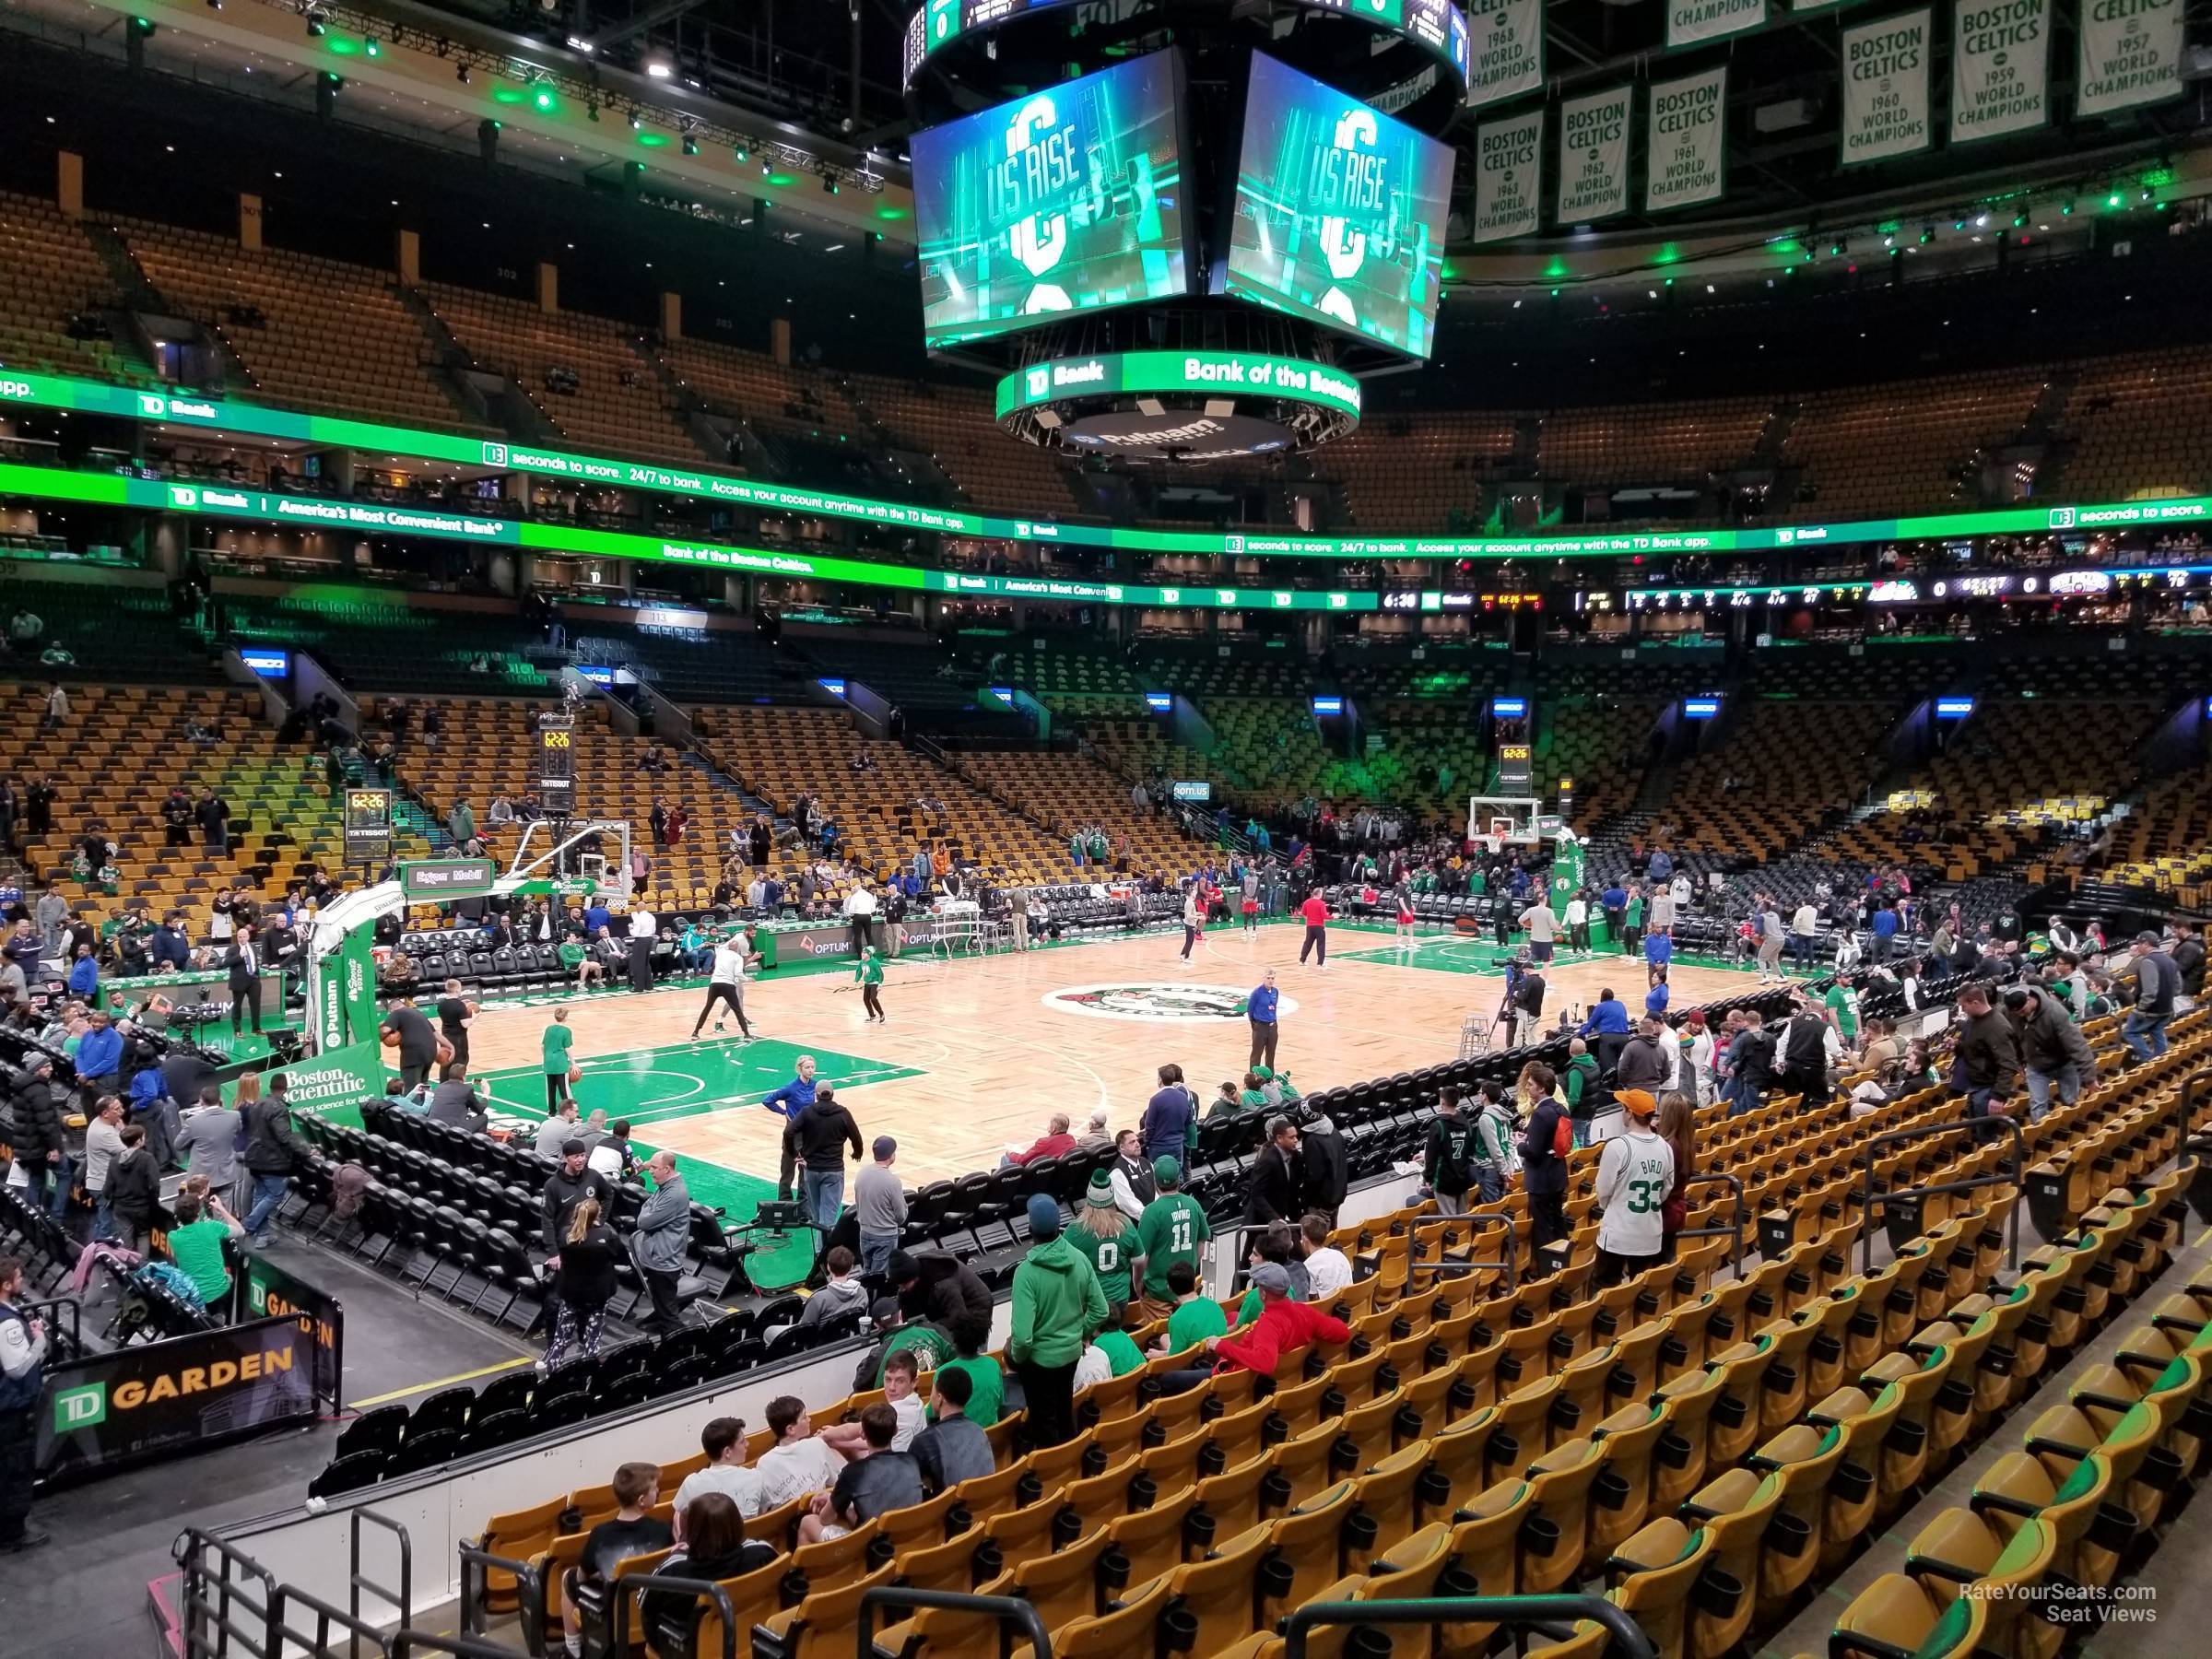 loge 15, row 13 seat view  for basketball - td garden